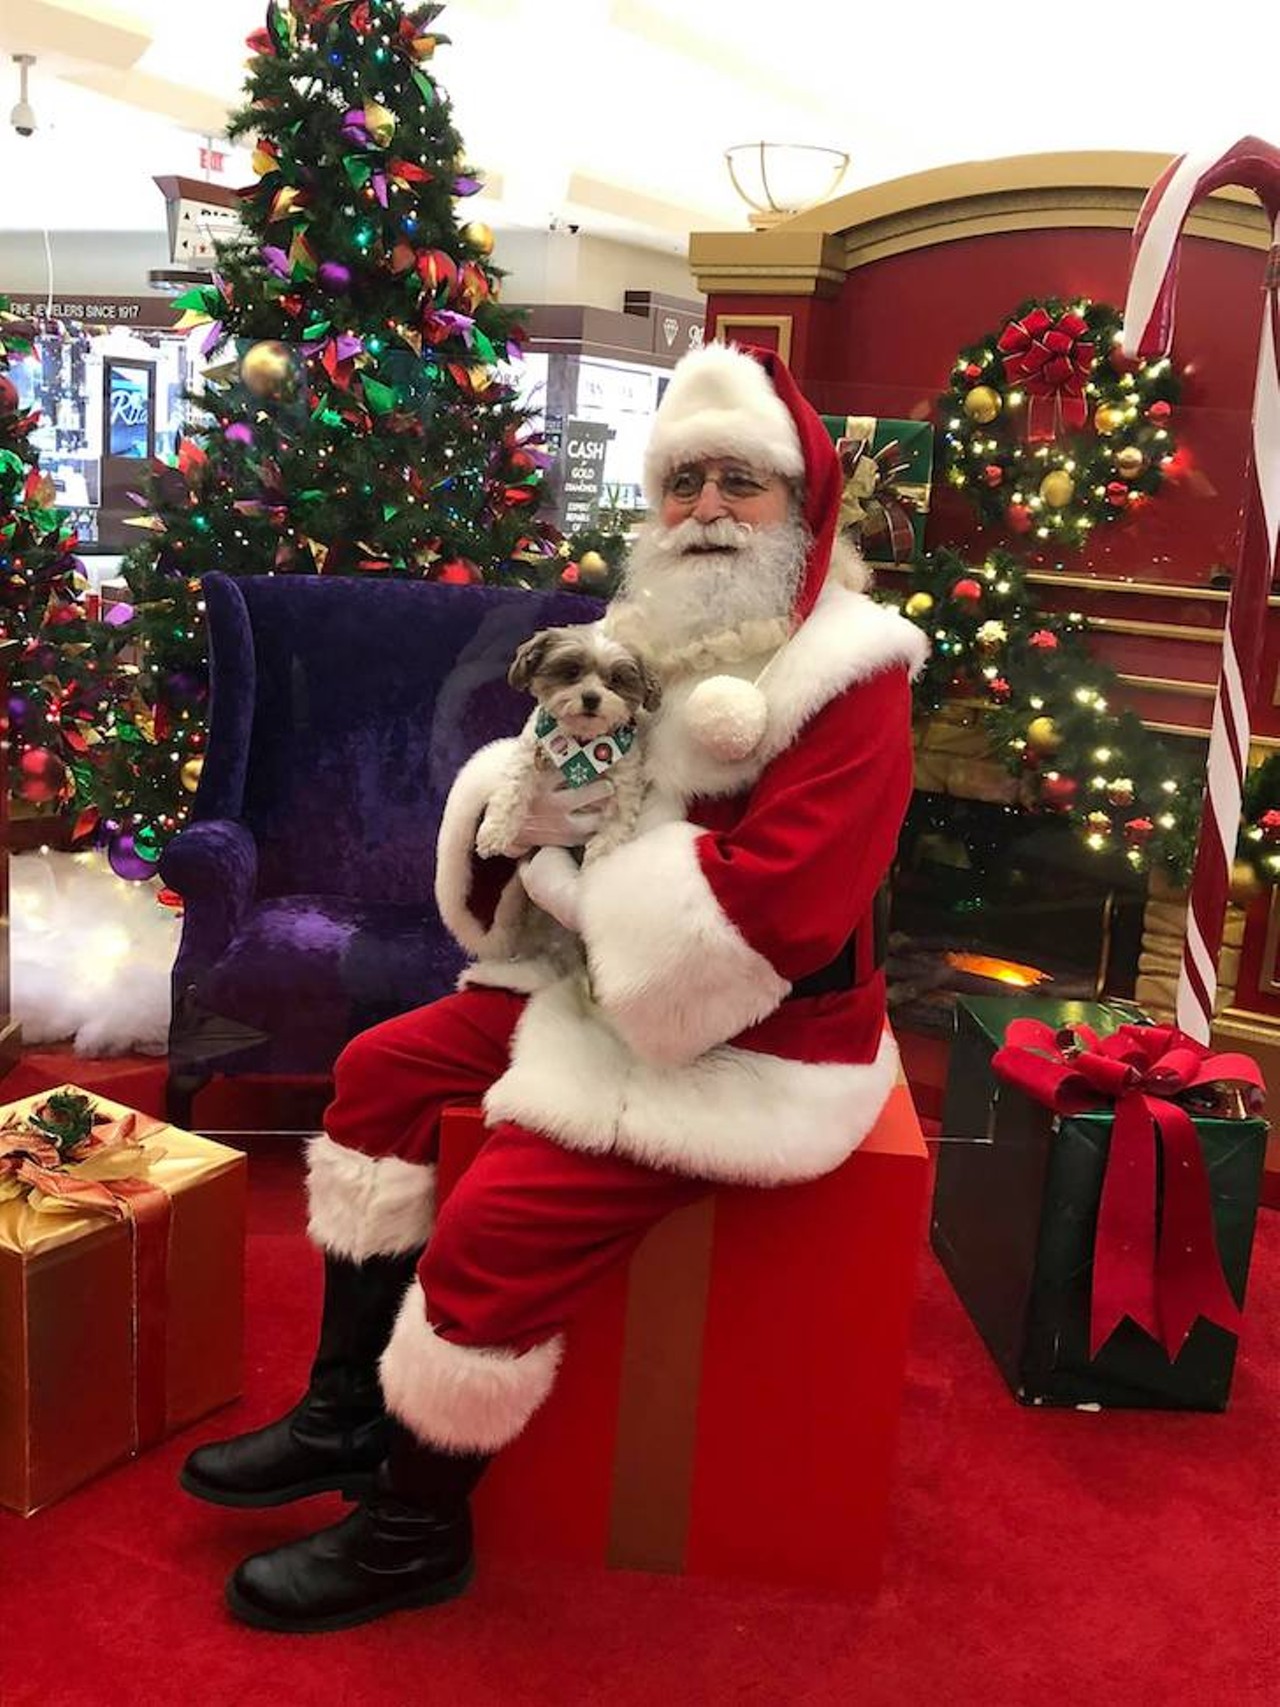 Let your pup take a pic with Saint Nick
Santa Claus gets a lot of love this time of year, but what about Santa paws? Malls like Oakland Mall and Twelve Oaks Mall are having special days for your furry friends to take pictures with Santa Claus. You can also check your local PetSmart for Santa photos as well.